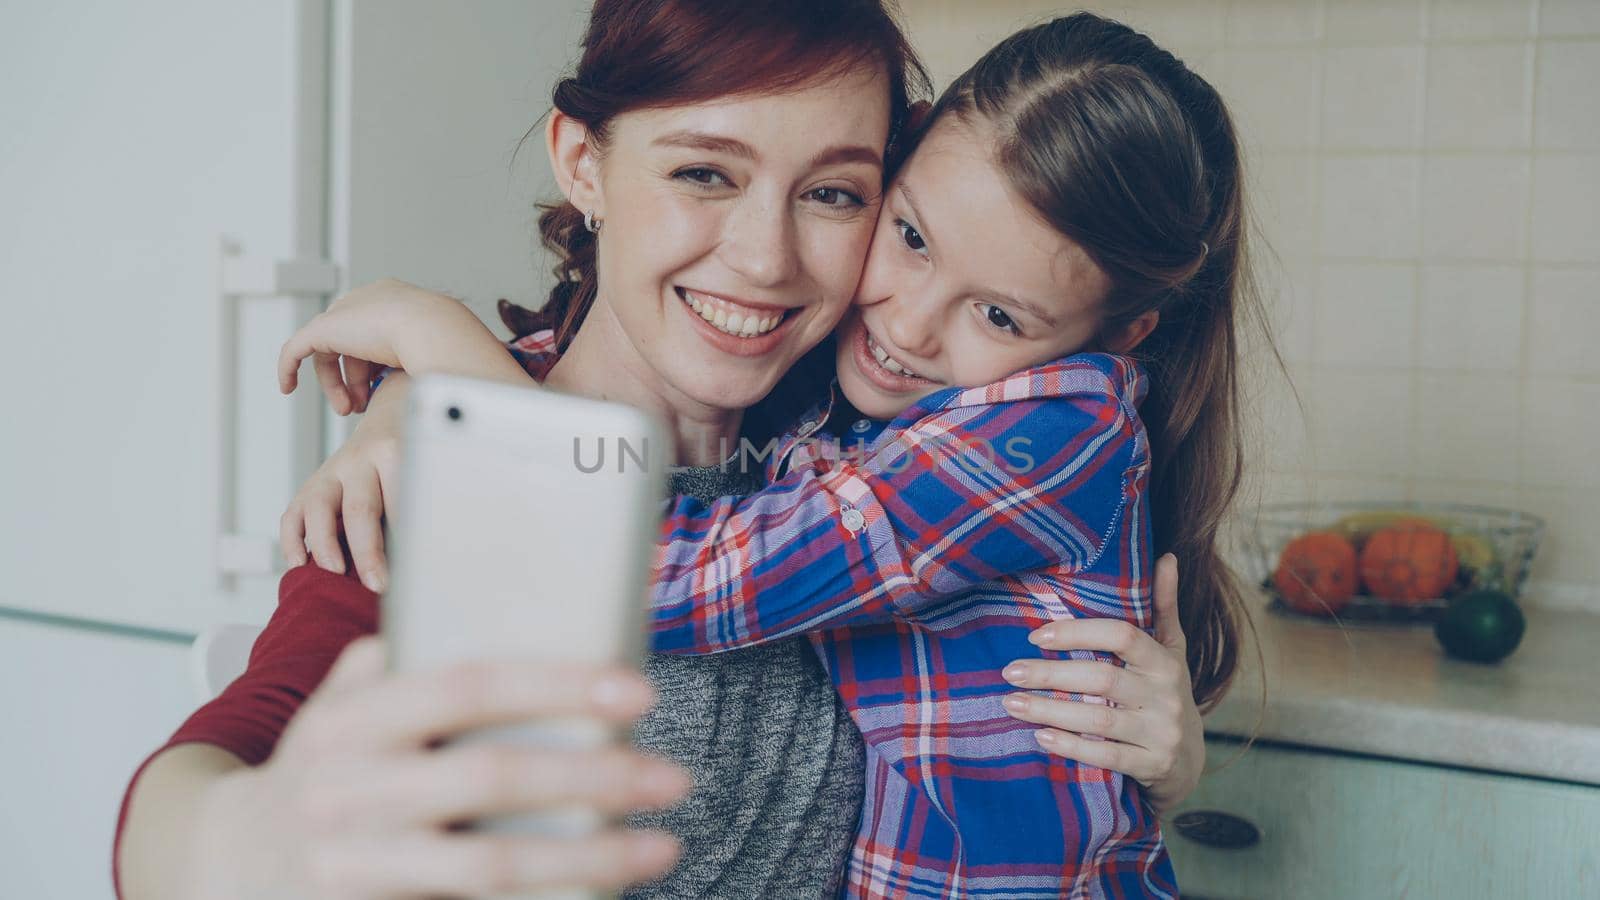 Smiling mother together with funny playful daughter making selfie photo with smartphone camera at home in kitchen. Family, cooking, and people concept